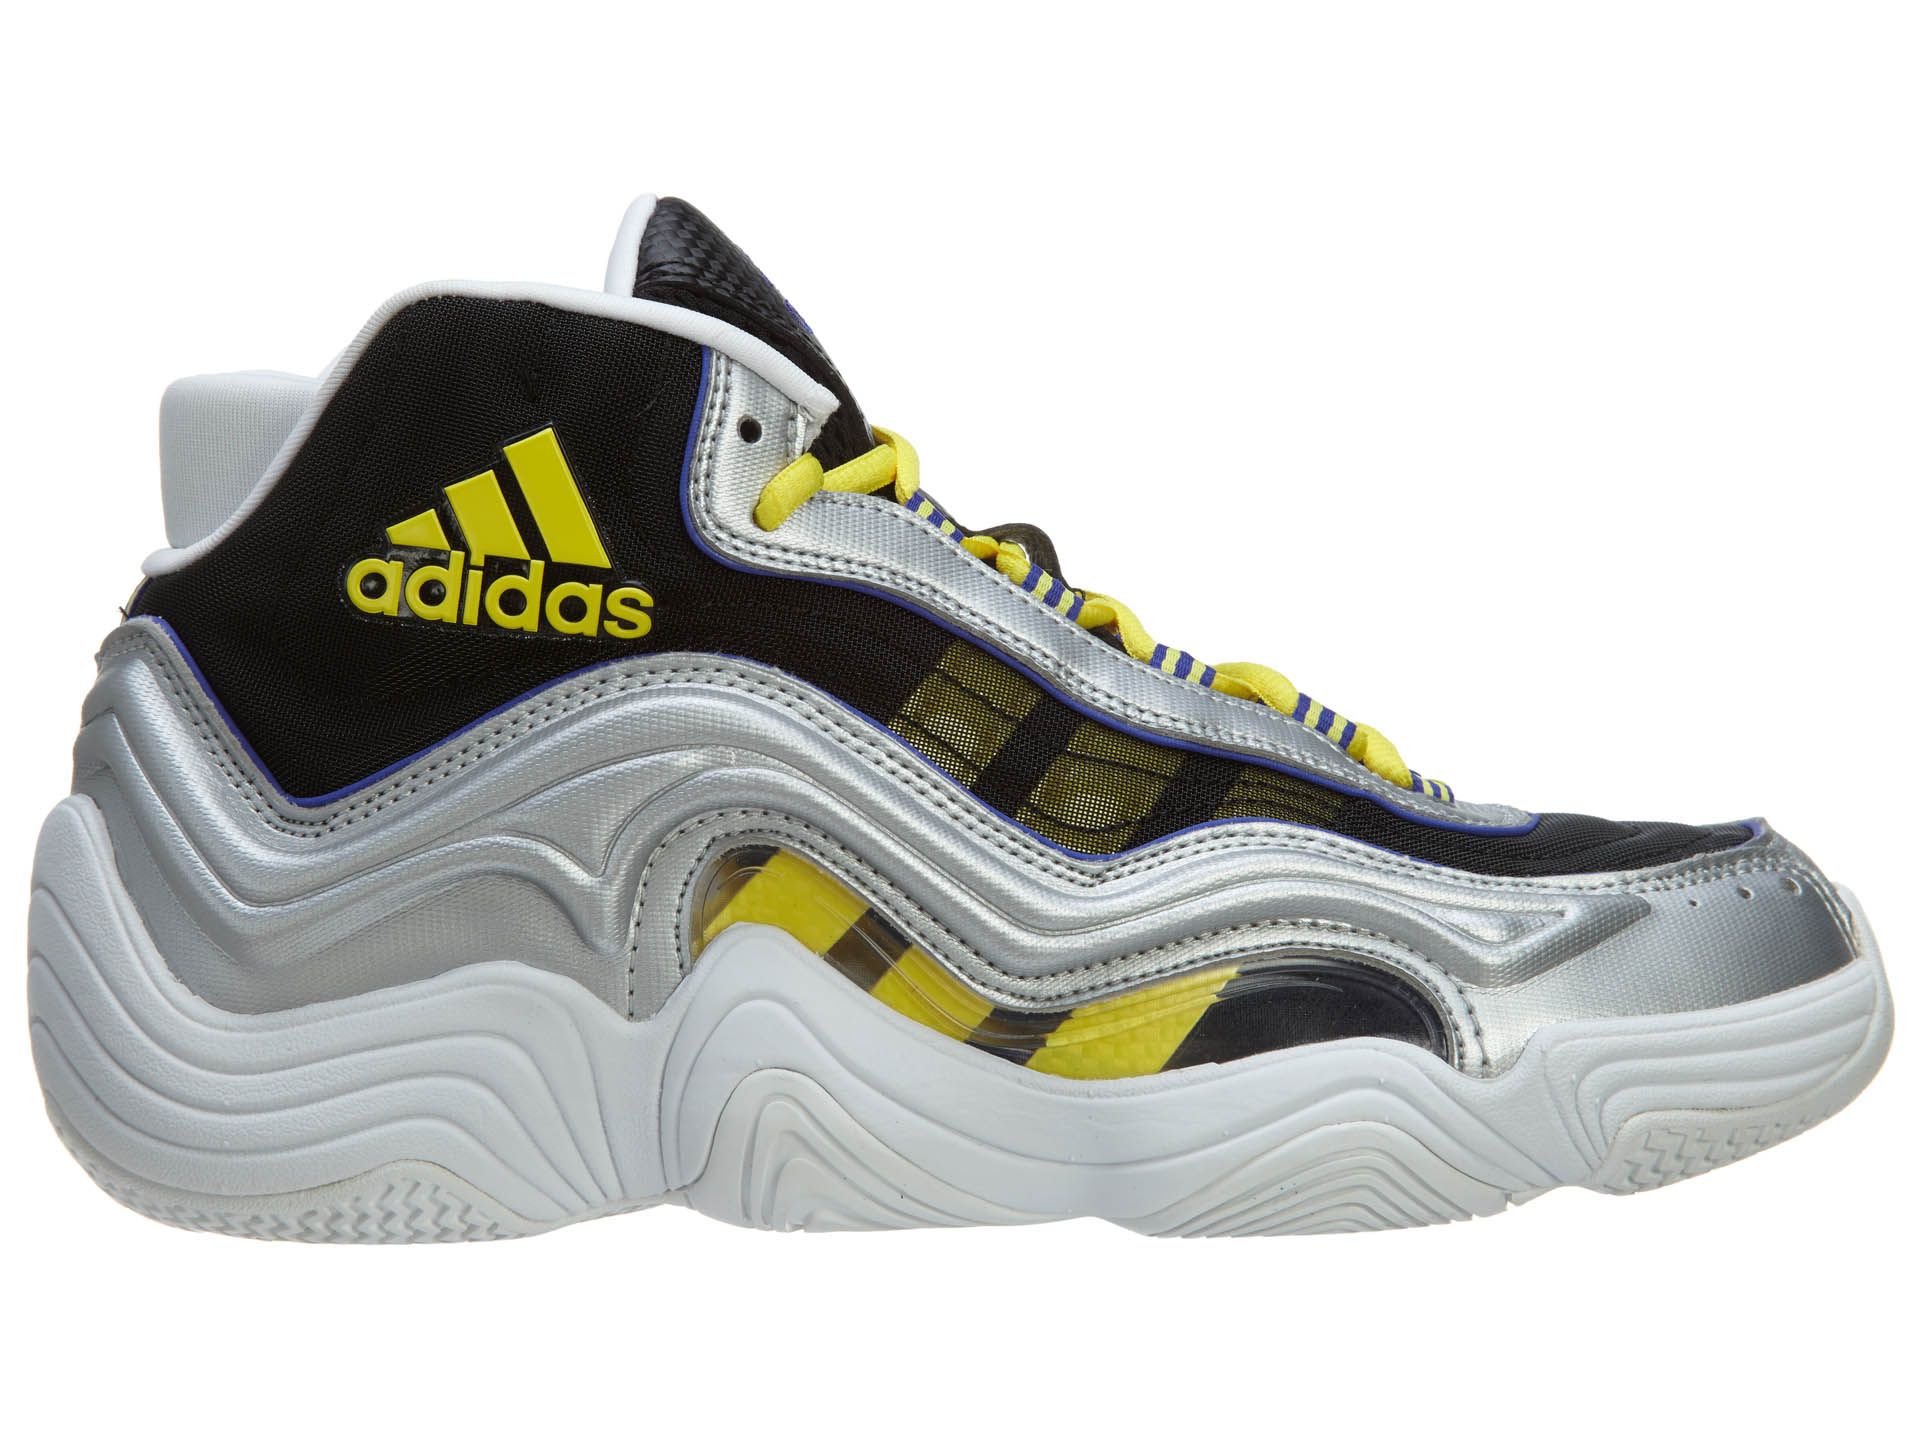 Adidas Crazy 2 Basketball Shoes Mens Style : S83922-Sil/Metll/Flash